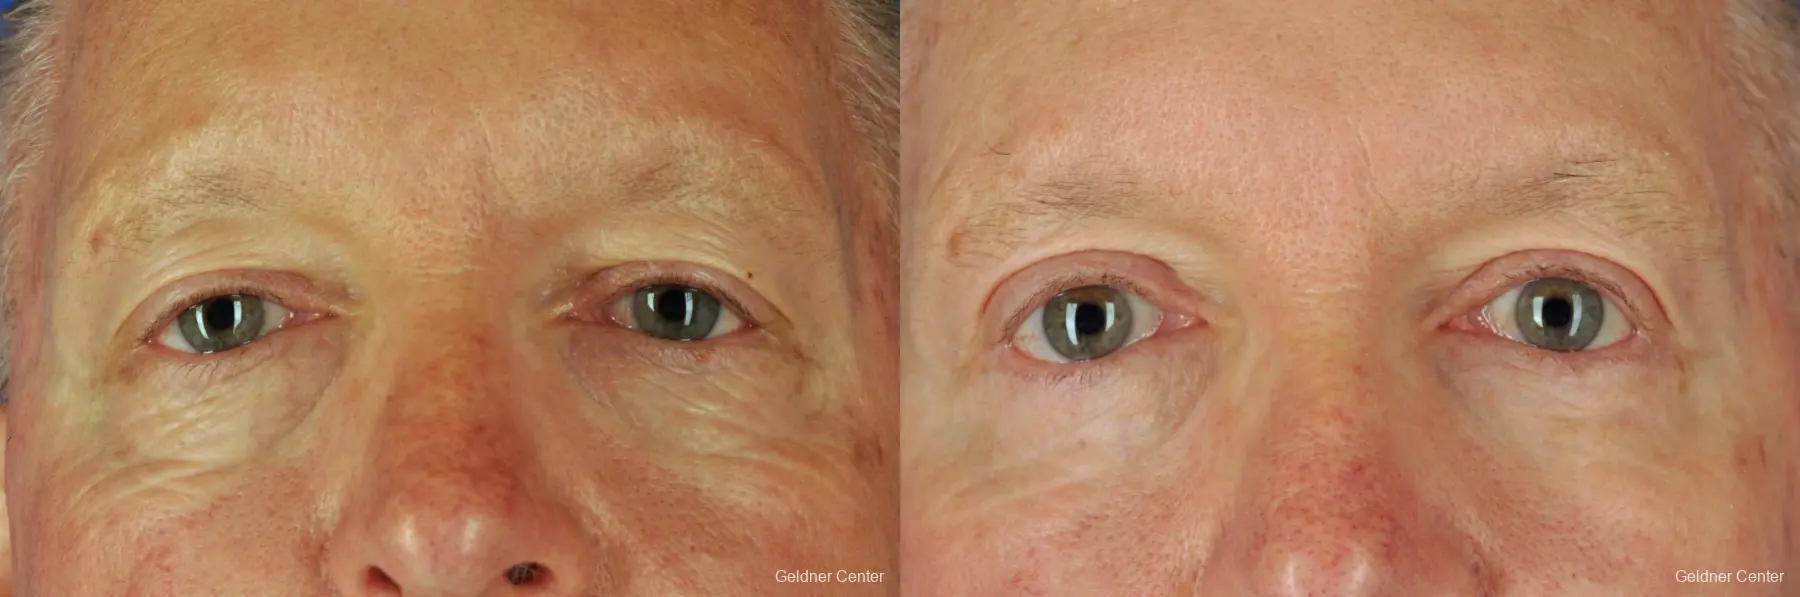 Eyelid Lift For Men: Patient 1 - Before and After 1